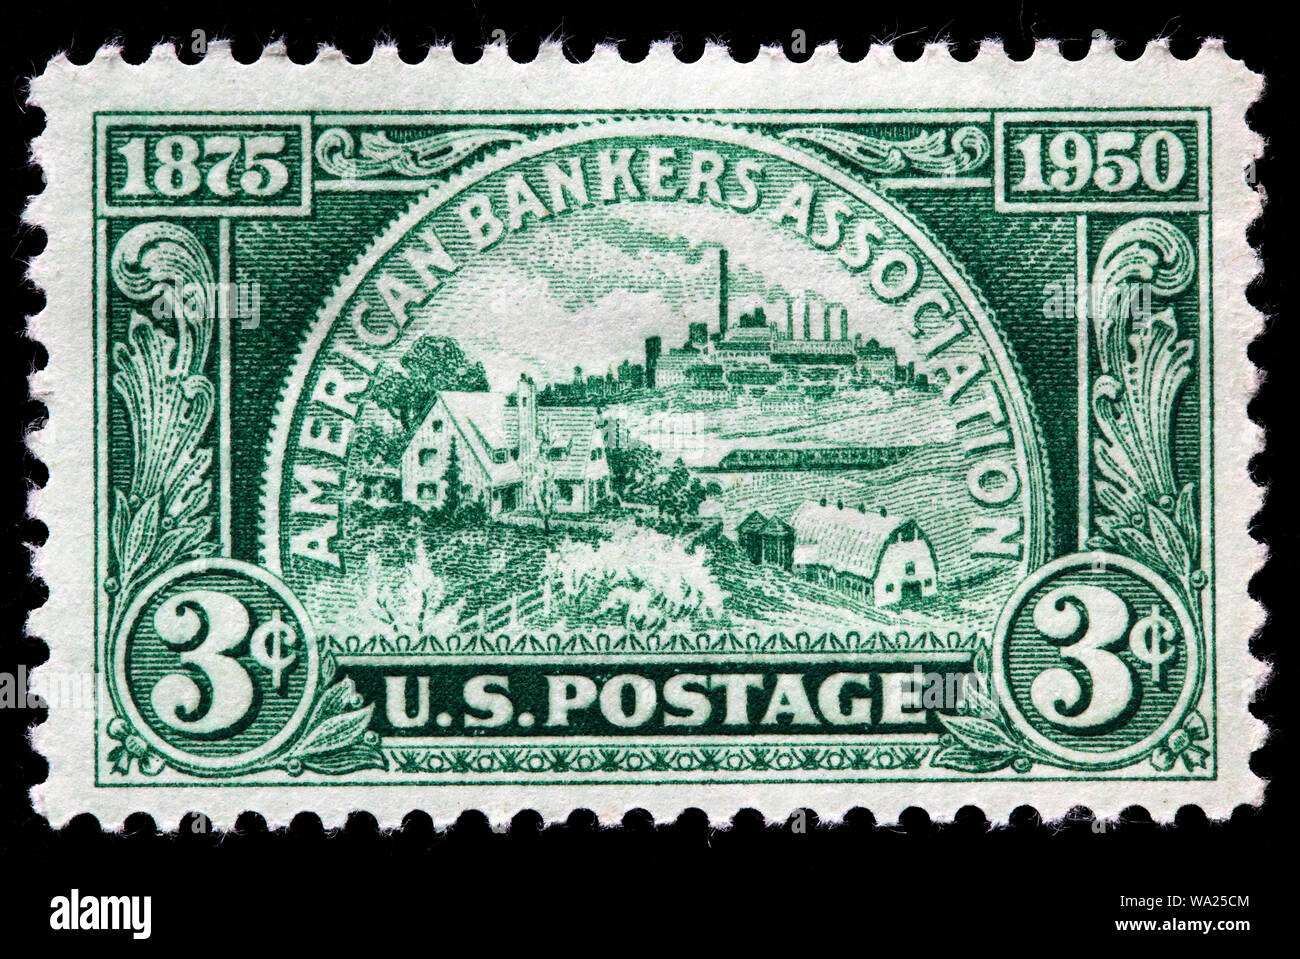 American Bankers Association, timbre-poste, USA, 1950 Banque D'Images